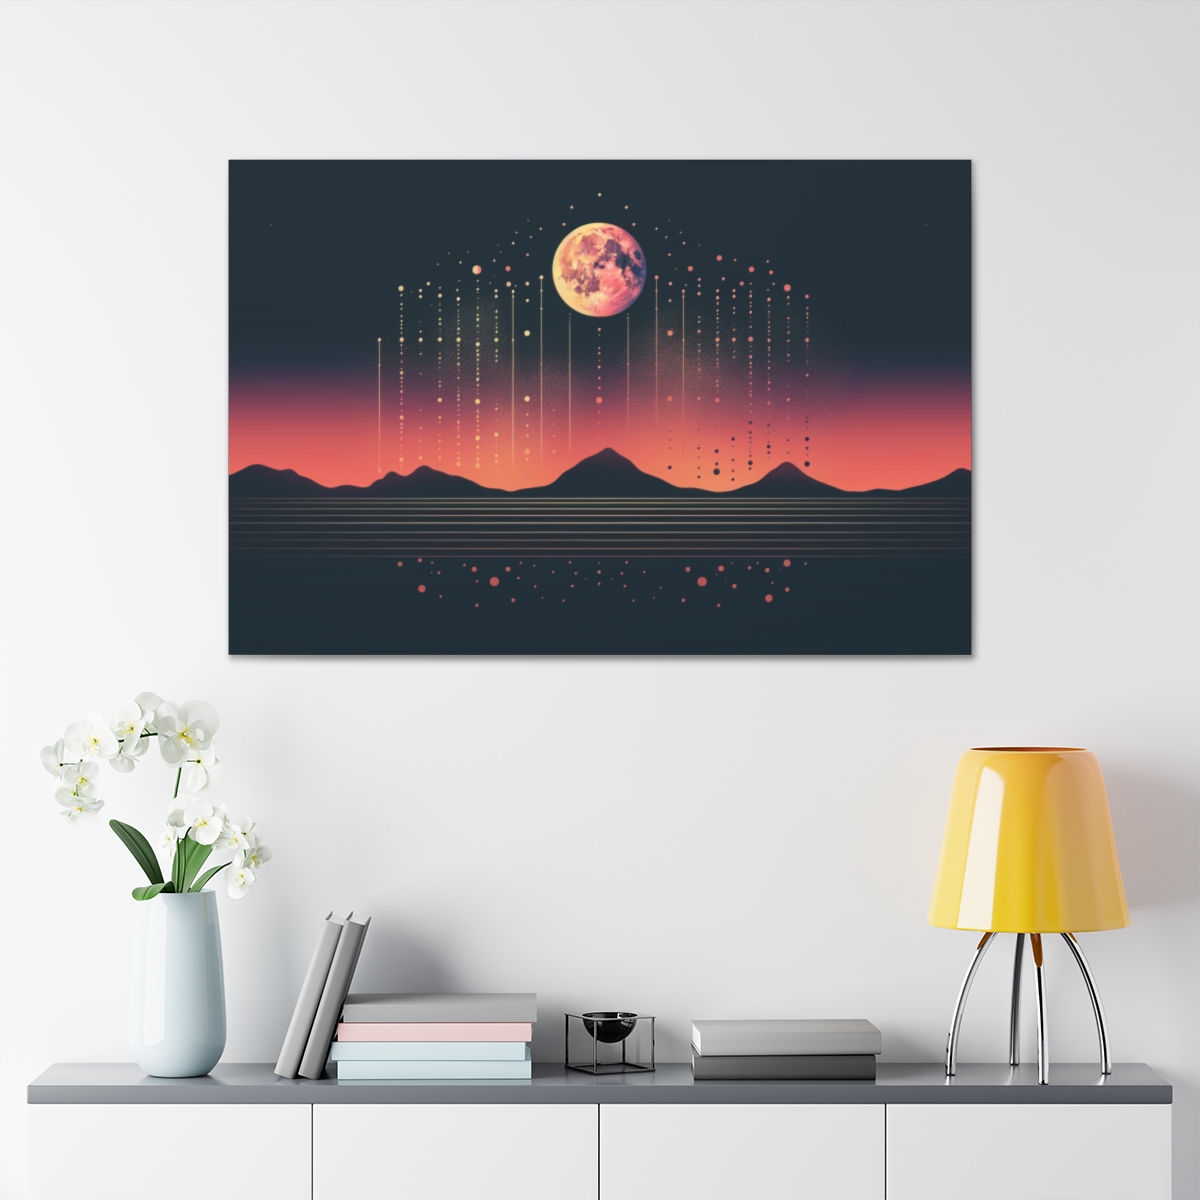 Abstract Moon Art: Embrace The Night